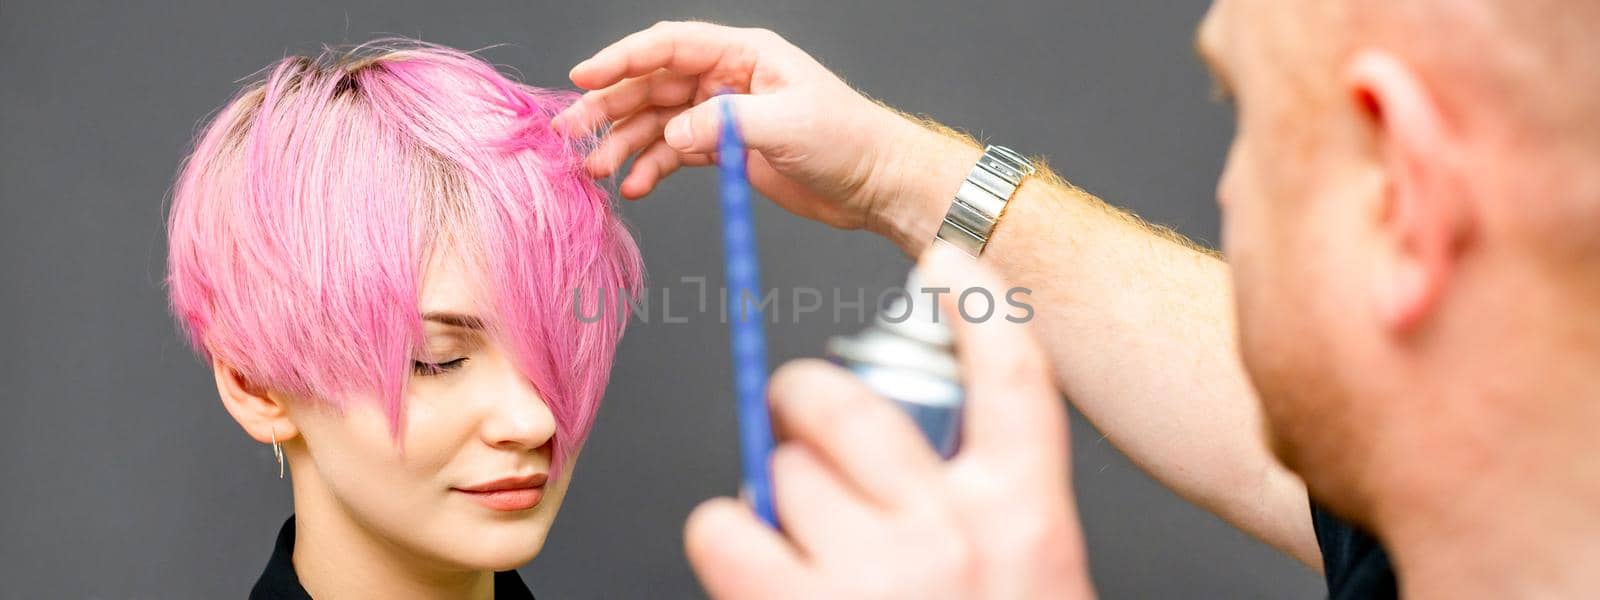 The hairdresser is using hair spray to fix the short pink hairstyle of the young caucasian woman in the hair salon